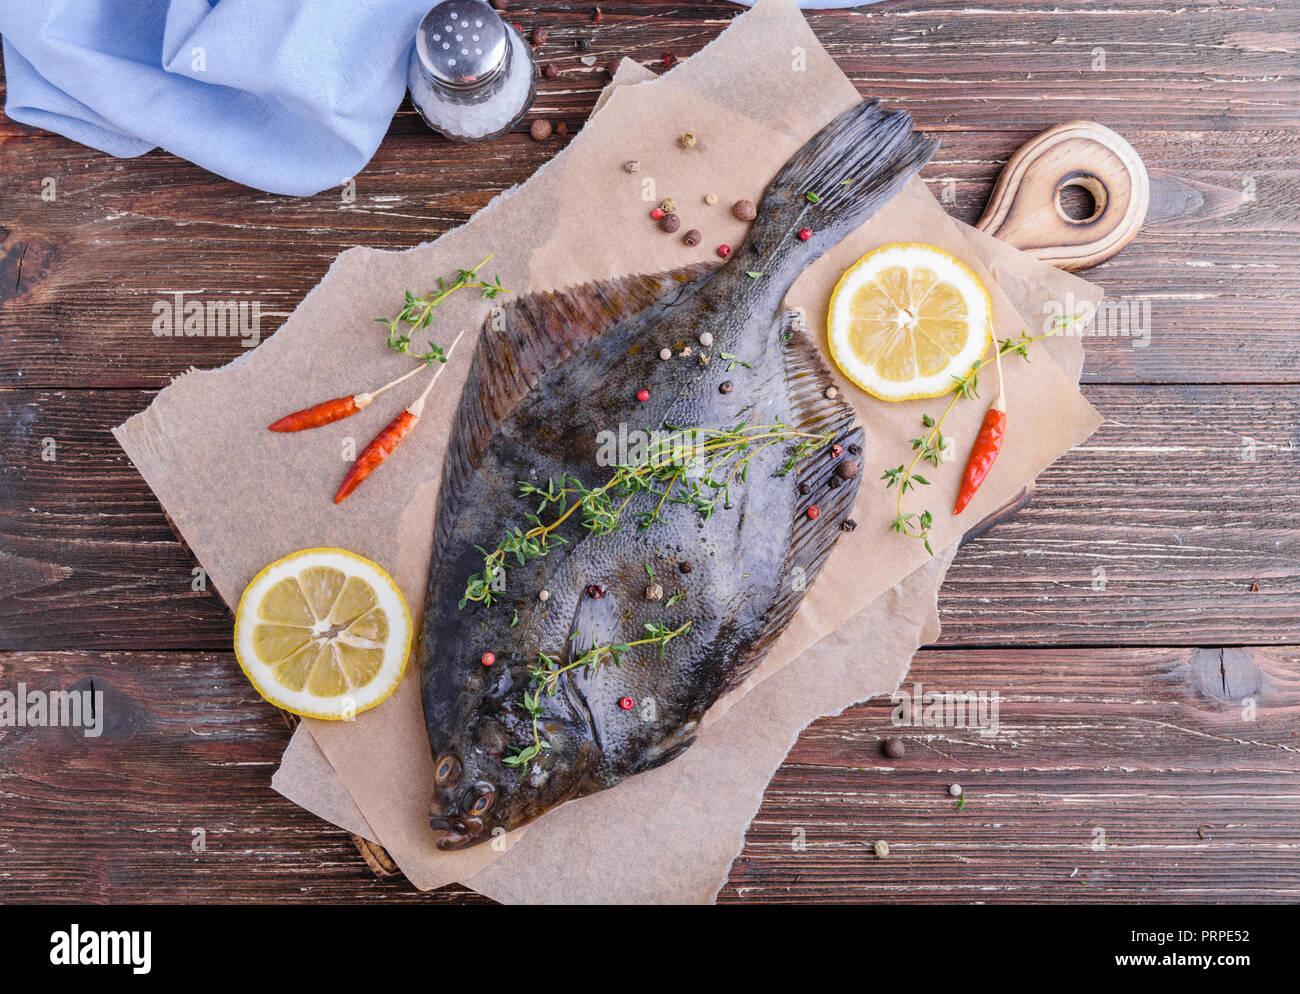 Raw flounder plaice fish (flatfish). Cooking process concept. Flounder fish with spices, lemon slices, thyme on parchment paper. Dark wooden table bac Stock Photo